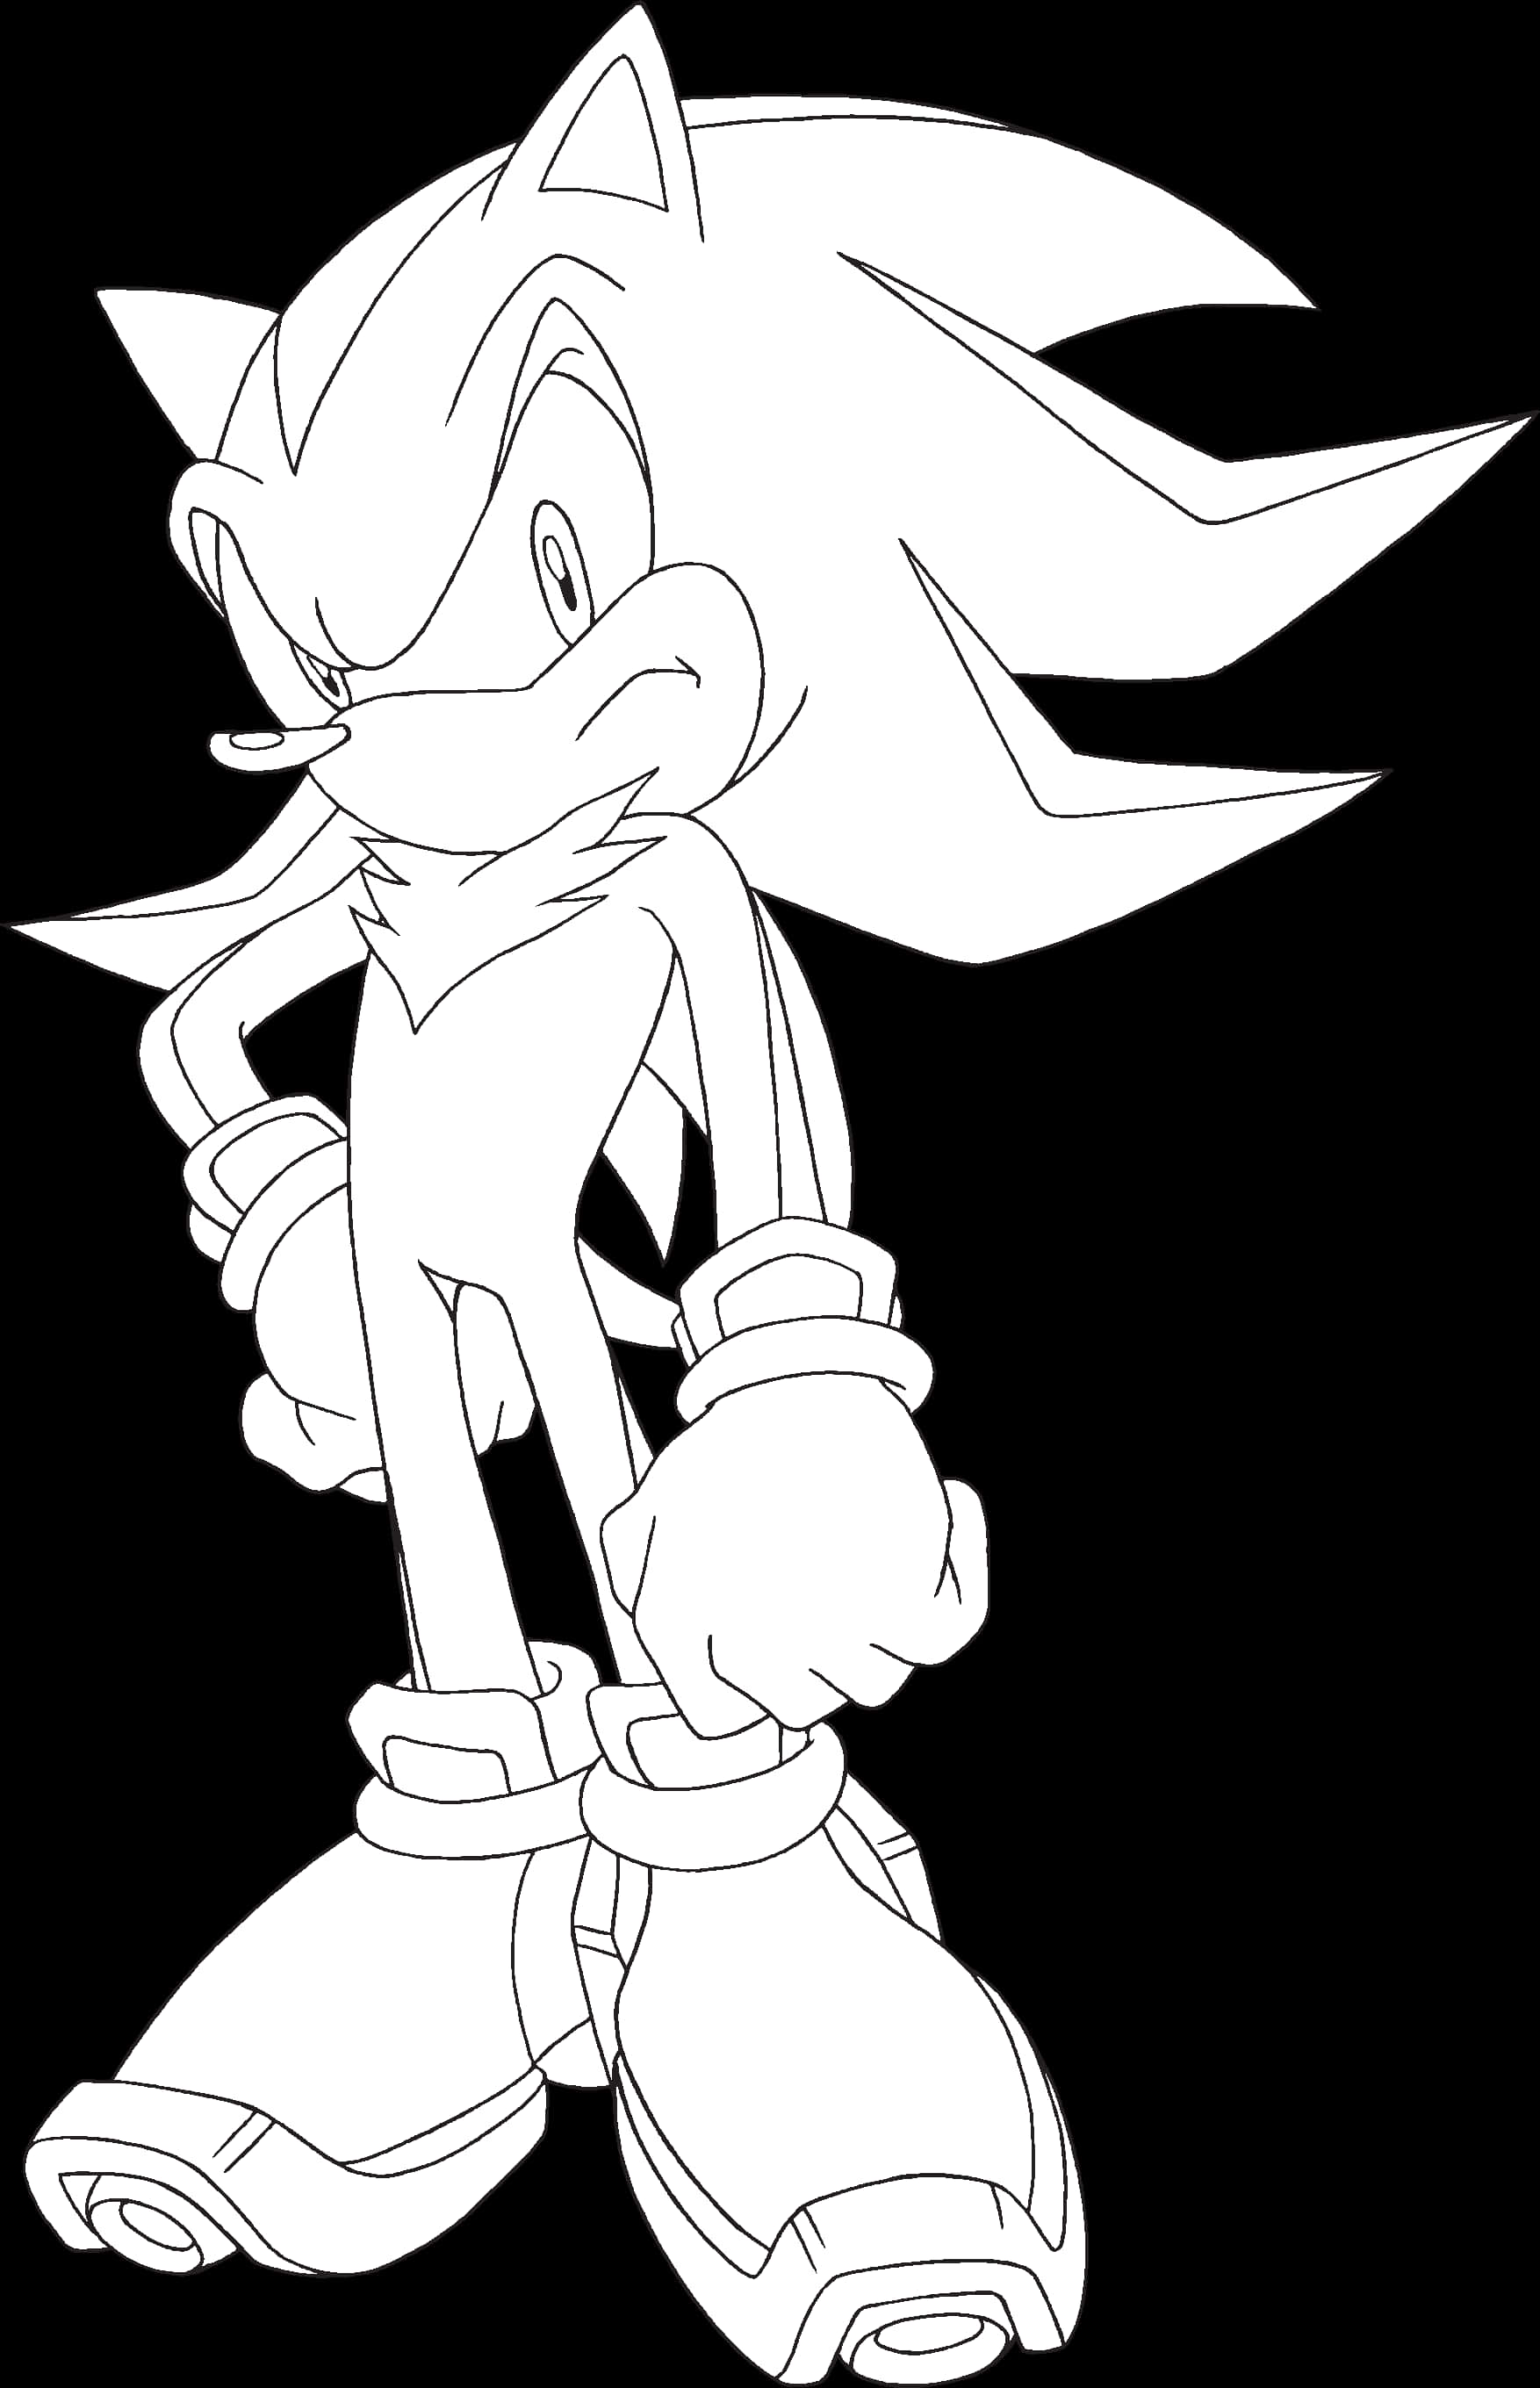 A Cartoon Of A Sonic Character